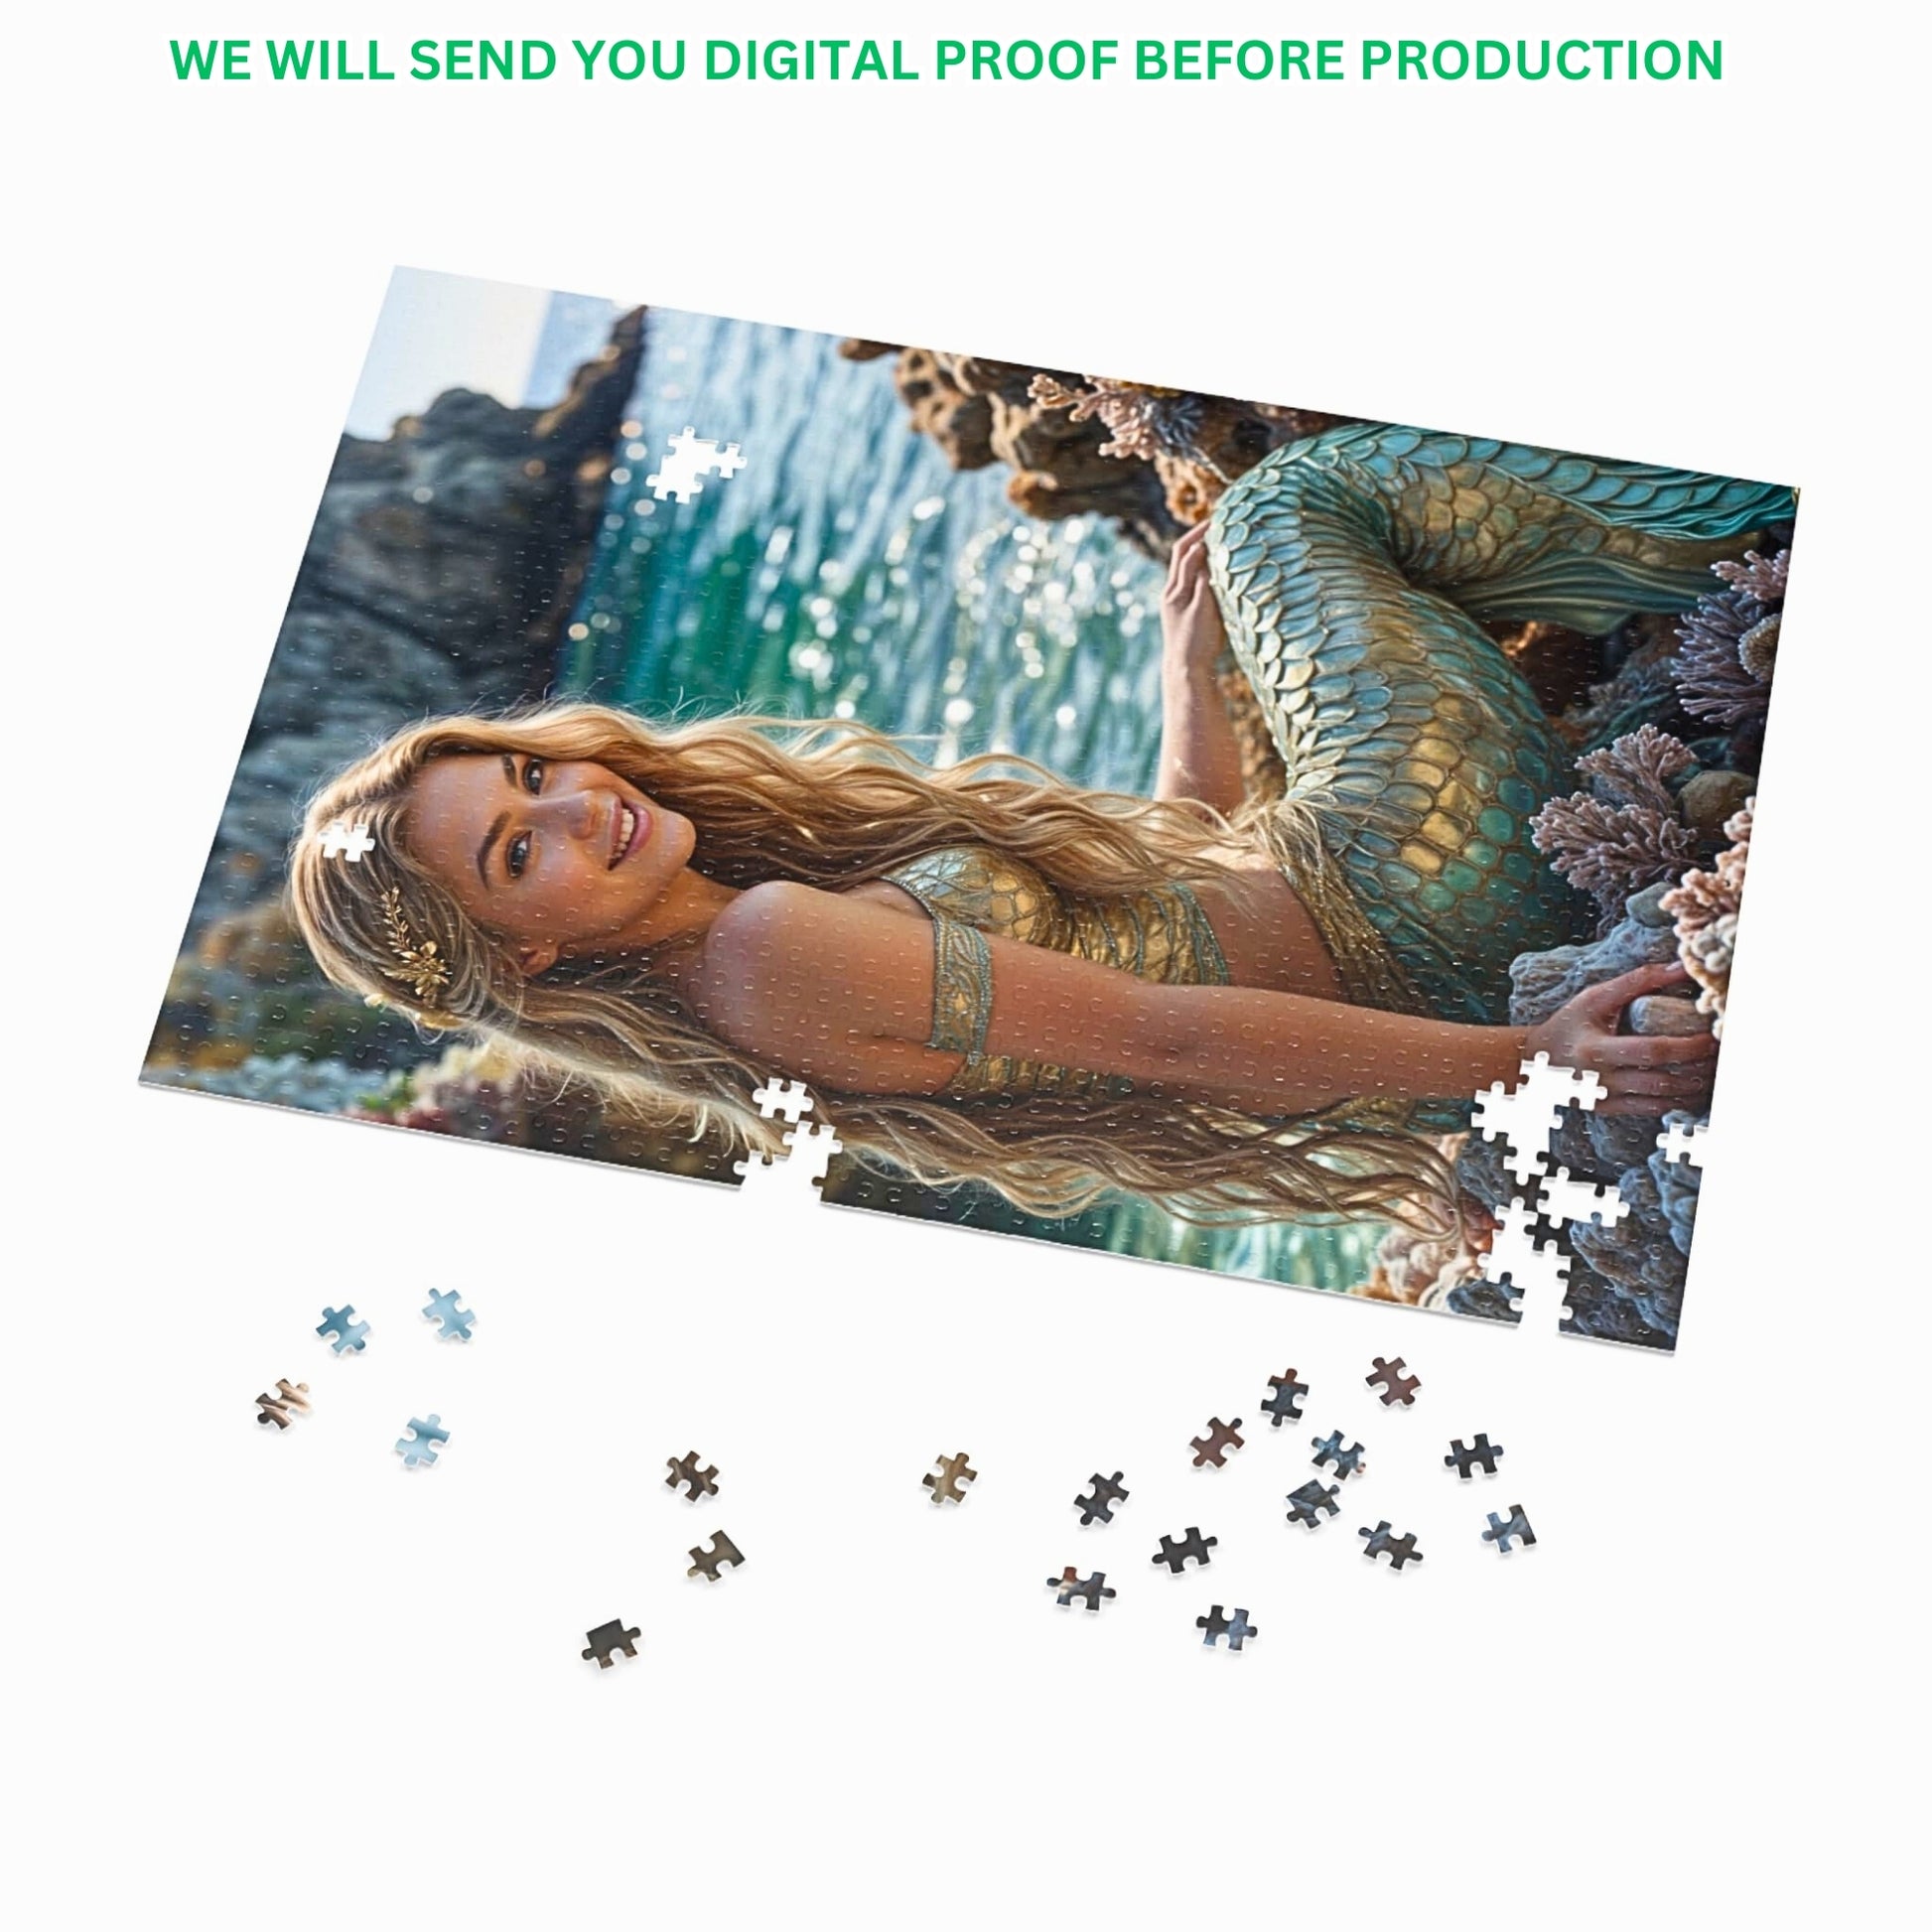 Create a unique custom mermaid puzzle from your favorite photo! Personalize your puzzle with a custom princess portrait for a one-of-a-kind mermaid gift. Choose from 250 to 1000 pieces for the perfect birthday puzzle gift. Lady mermaid gifts, princess gifts, and mermaid photo gifts available. Turn any photo into a custom mermaid art puzzle. Transform memories into personalized princess puzzles. Ideal for mermaid enthusiasts and princess fans alike. Order your custom mermaid puzzle today!